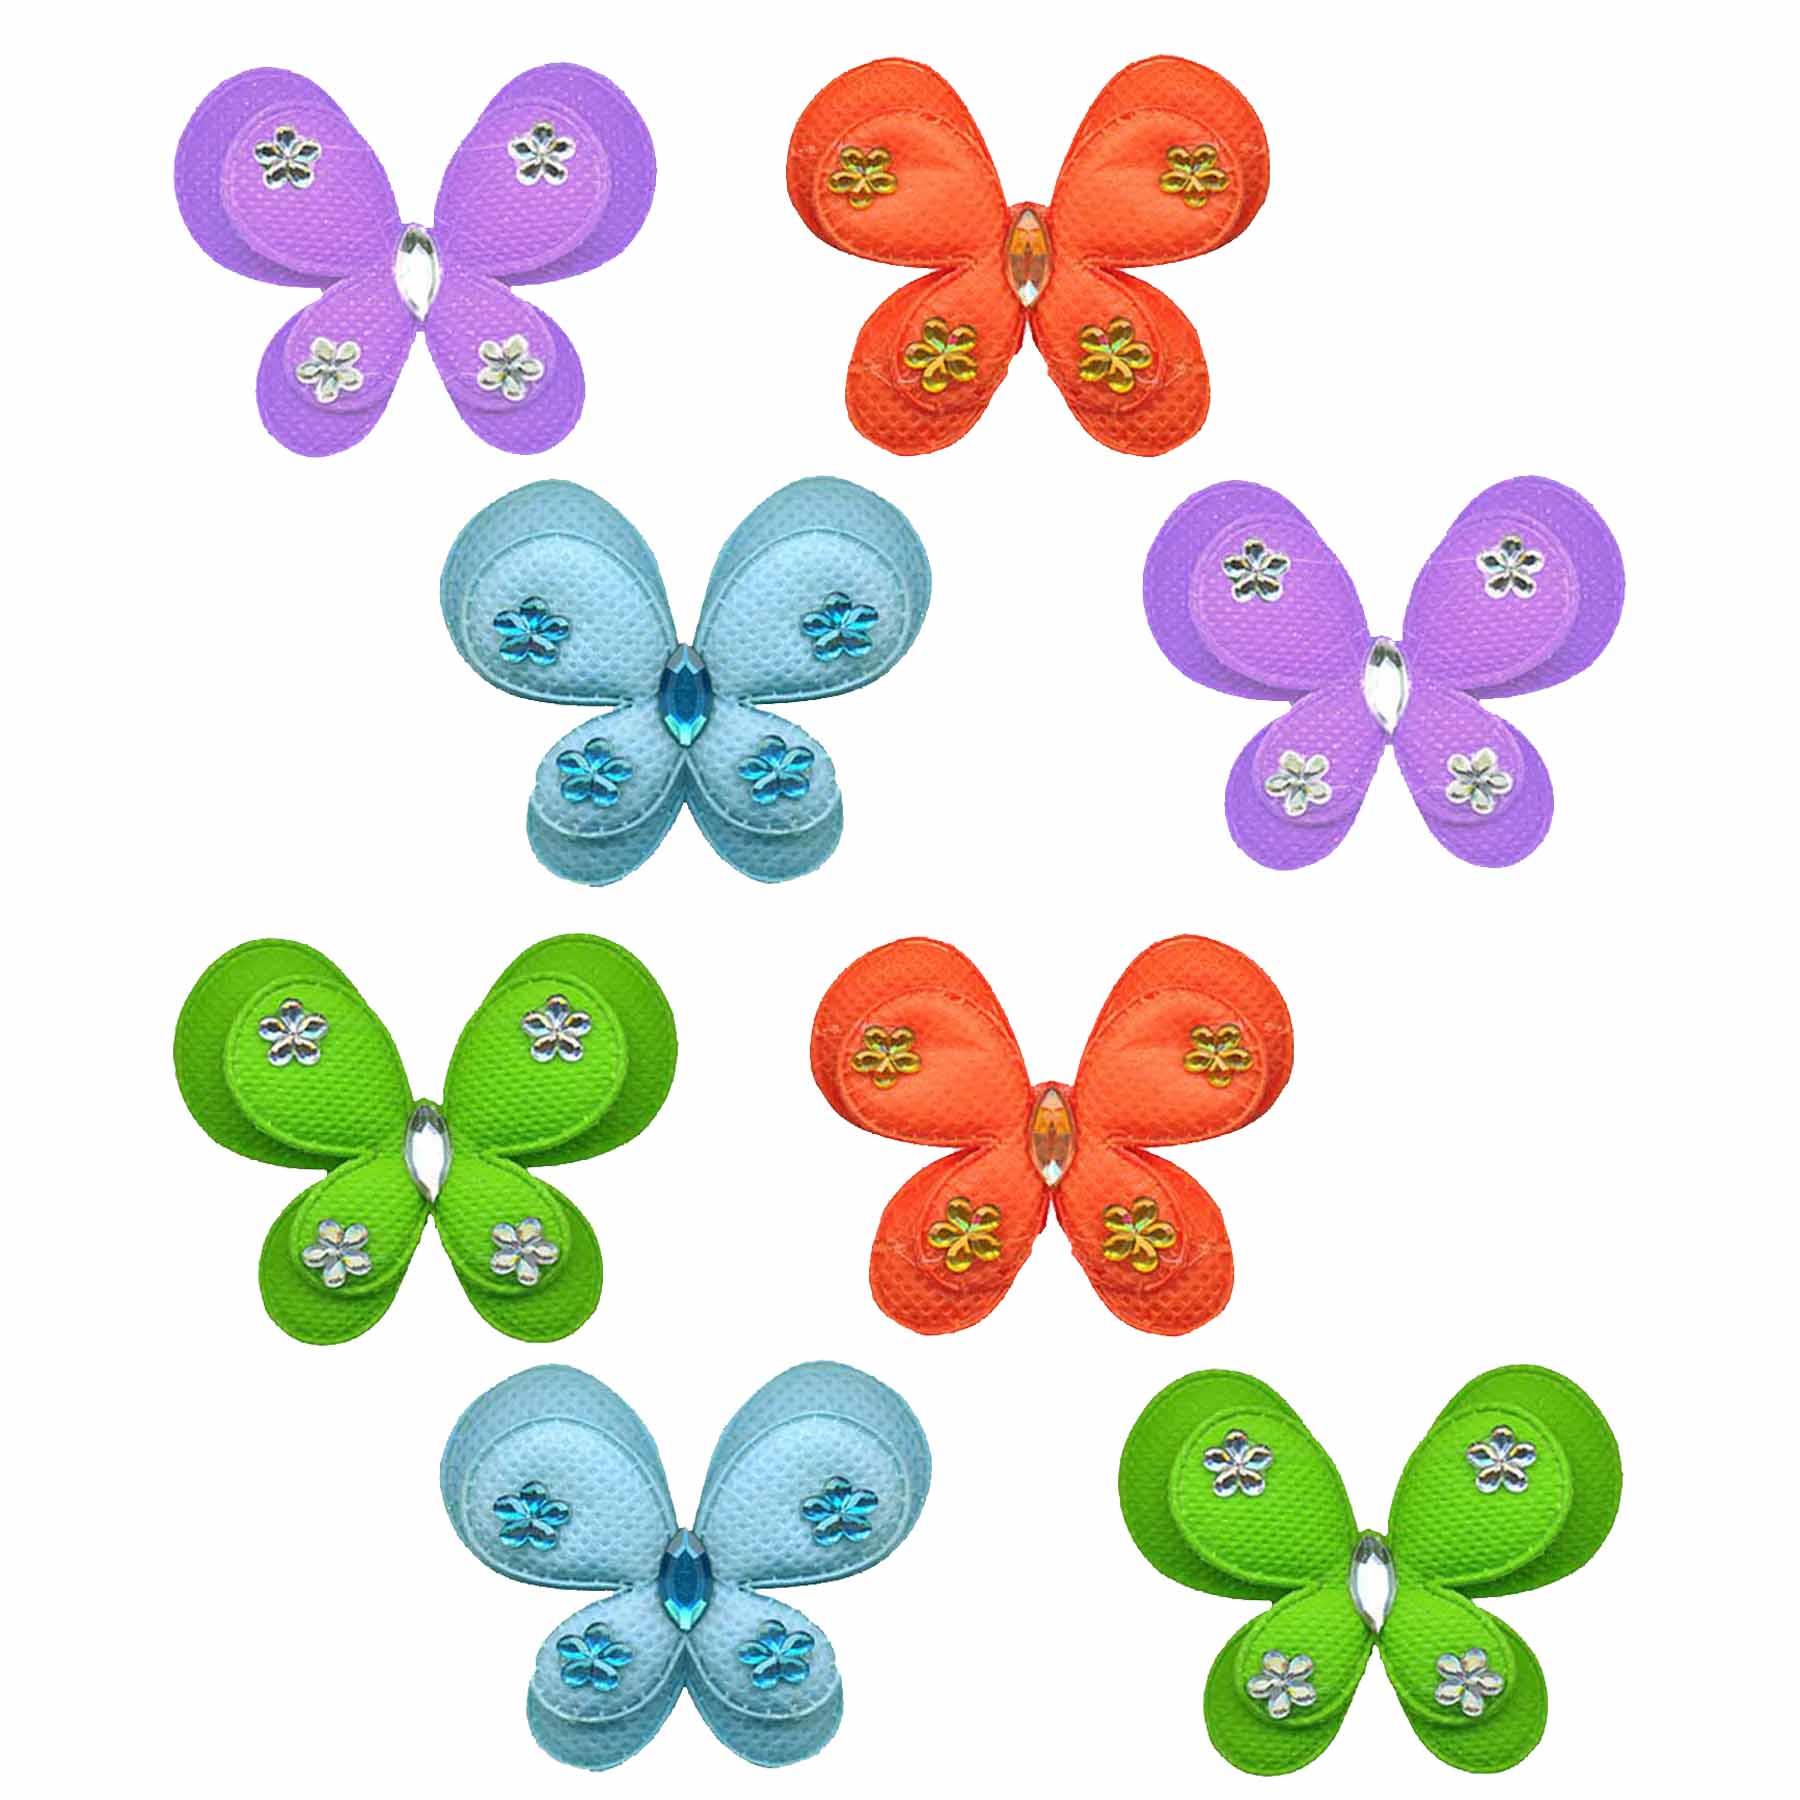 Easter Decorations, Bonnet Making, Arts and Crafts - 8 Pack Butterfly Stickers